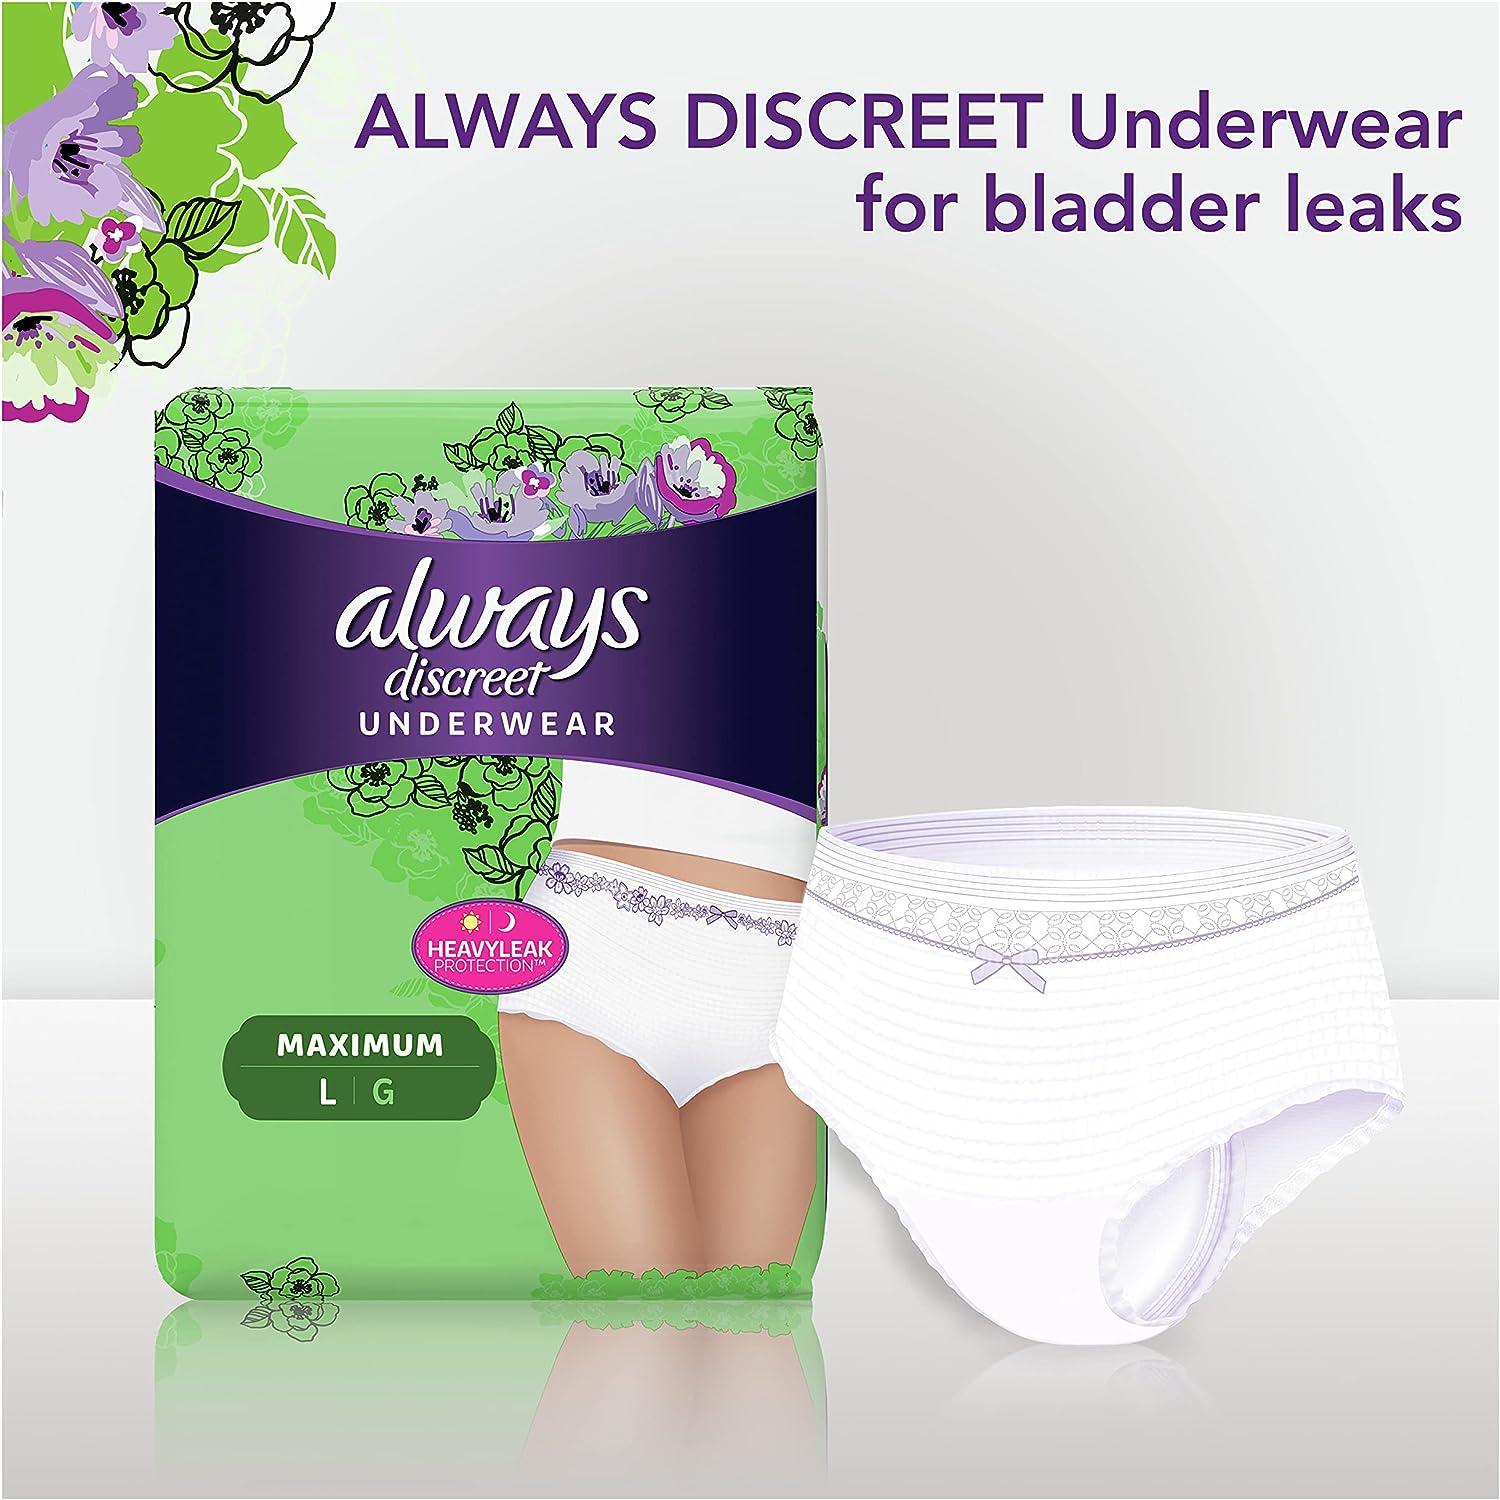 ALWAYS DISCREET Boutique Low Rise Underwear L/G (10 Count) MAX PROTECT